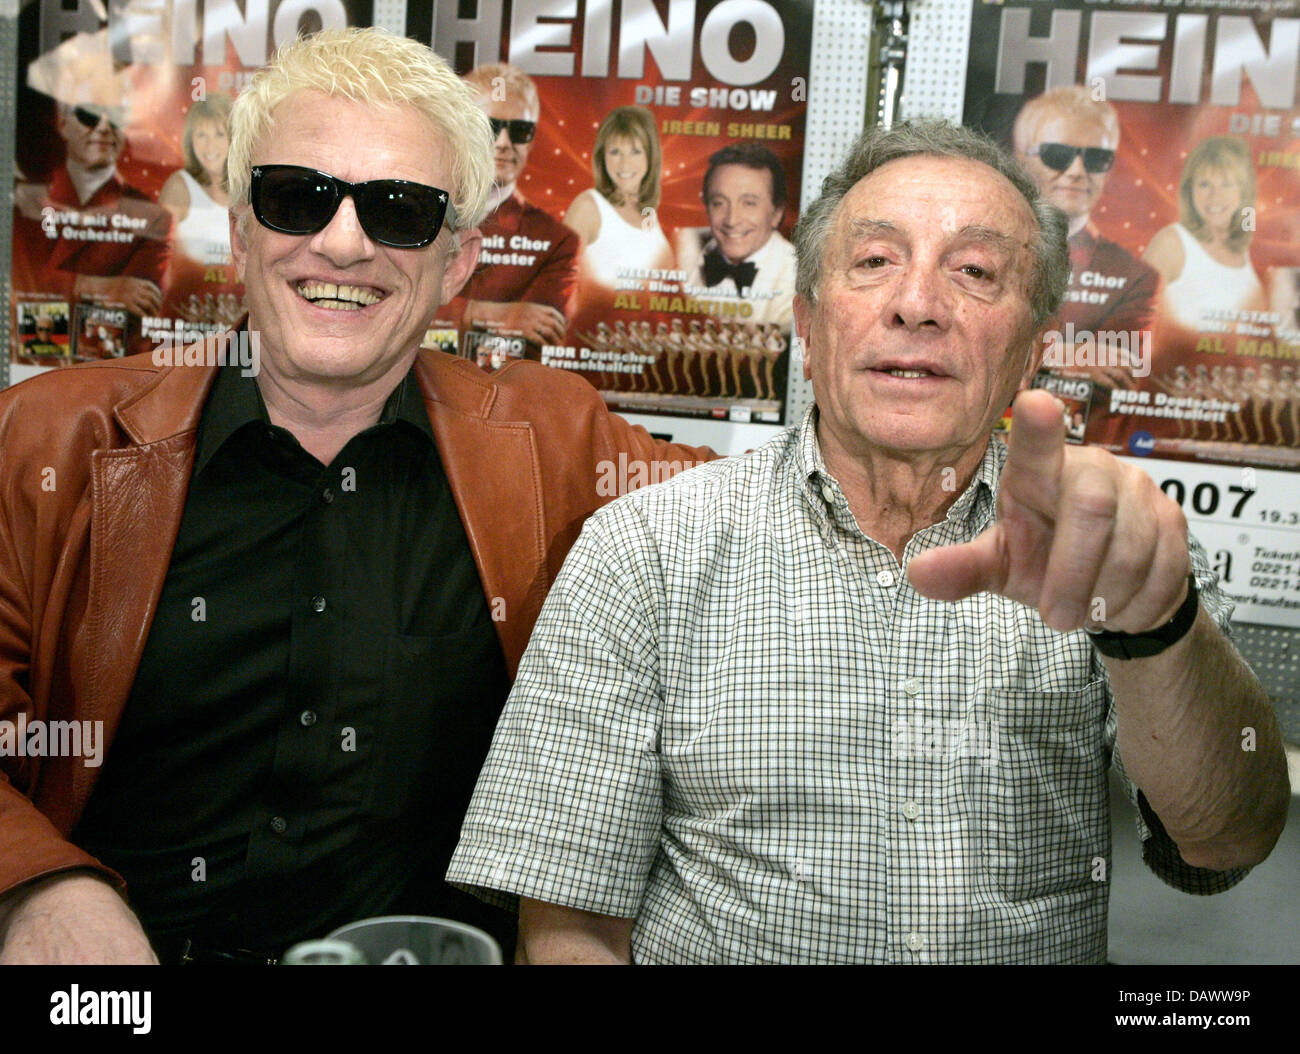 The singers Heino (L) and Al Martino announce their upcoming tour at a press conference in Cologne, Germany, 20 June 2007. They will play about 50 shows and 1 Euro of every sold ticket will go to the 'Herzenwuensche' foundation which fulfils wishes of terminally ill children. Photo: Joerg Carstensen Stock Photo